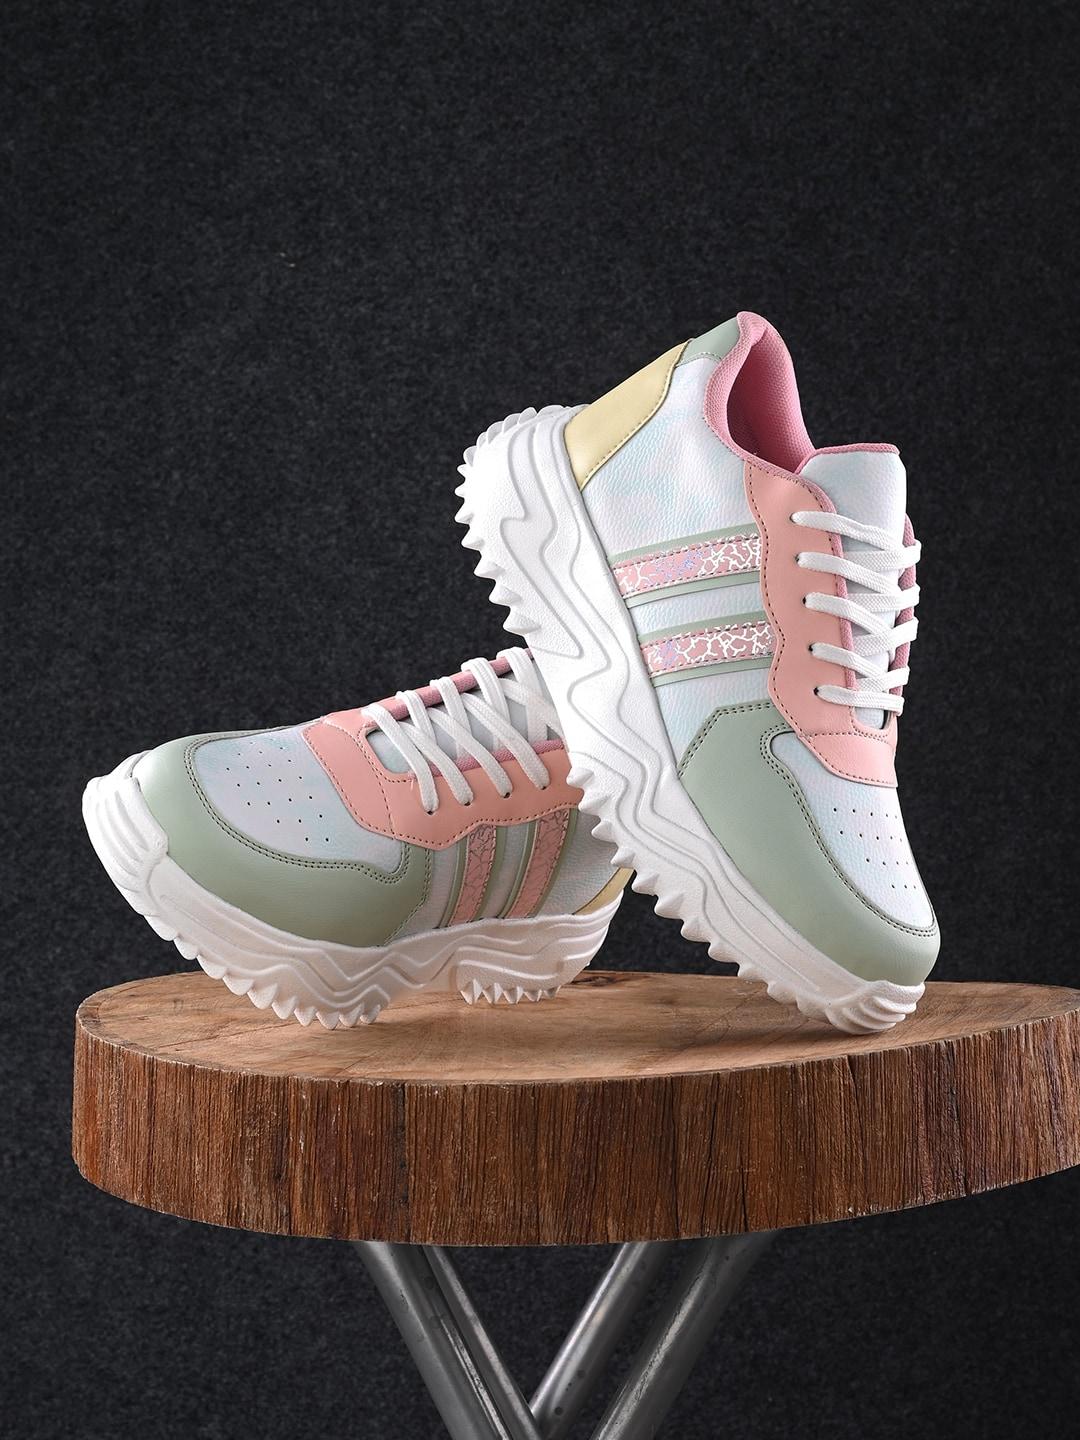 the-roadster-lifestyle-co.-women-white-&-pink-colourblocked-lightweight-comfort-sneakers